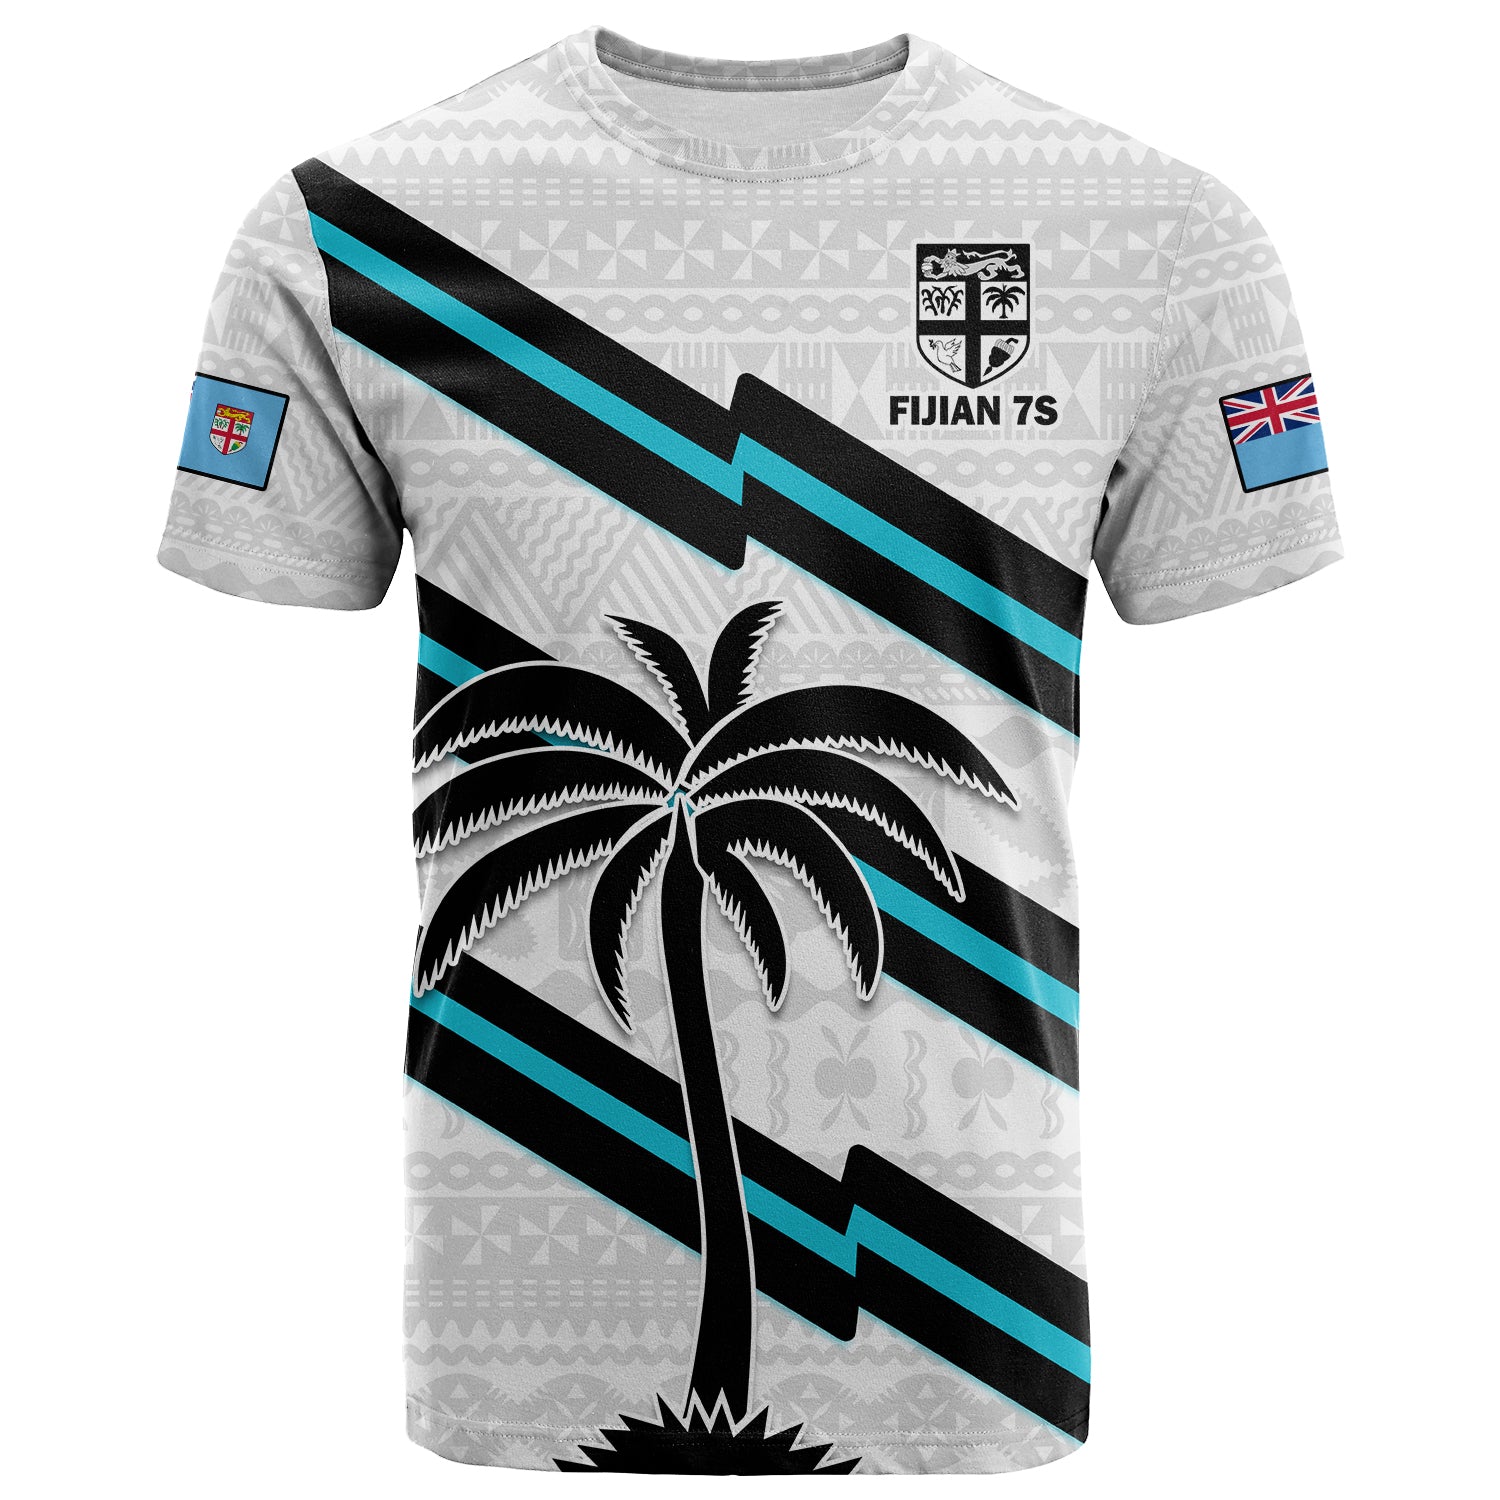 (Custom Text and Number) Fiji Rugby Tapa Pattern Fijian 7s White T Shirt LT14 White - Polynesian Pride